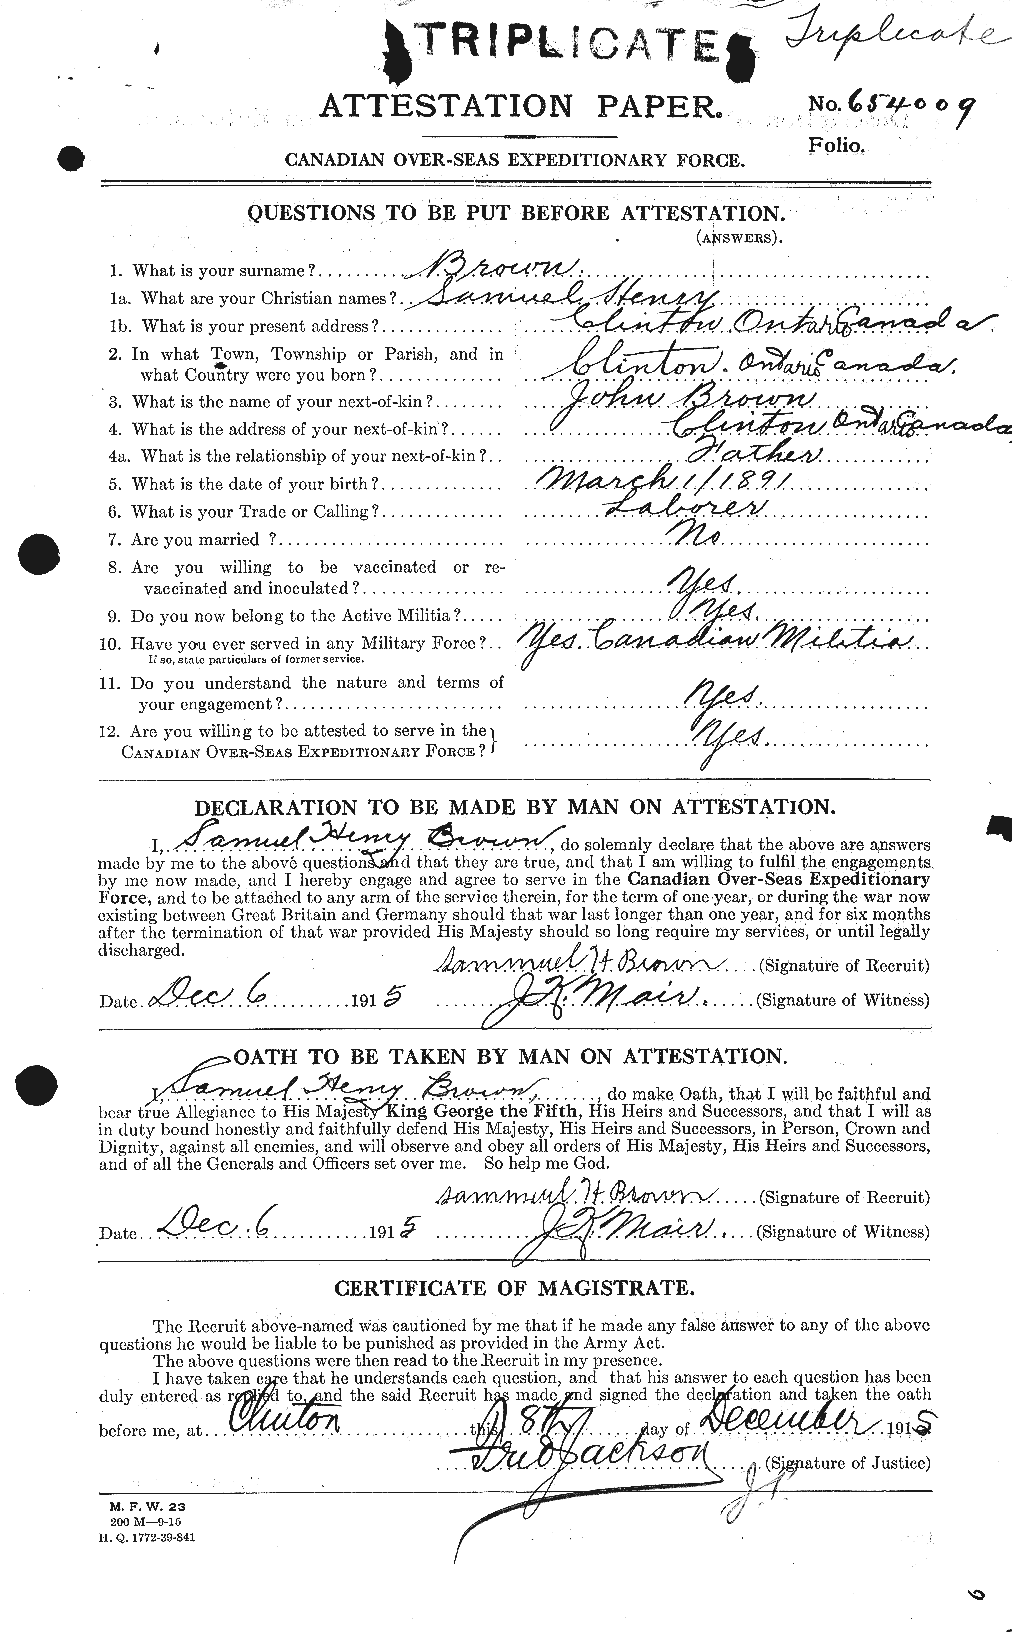 Personnel Records of the First World War - CEF 266393a